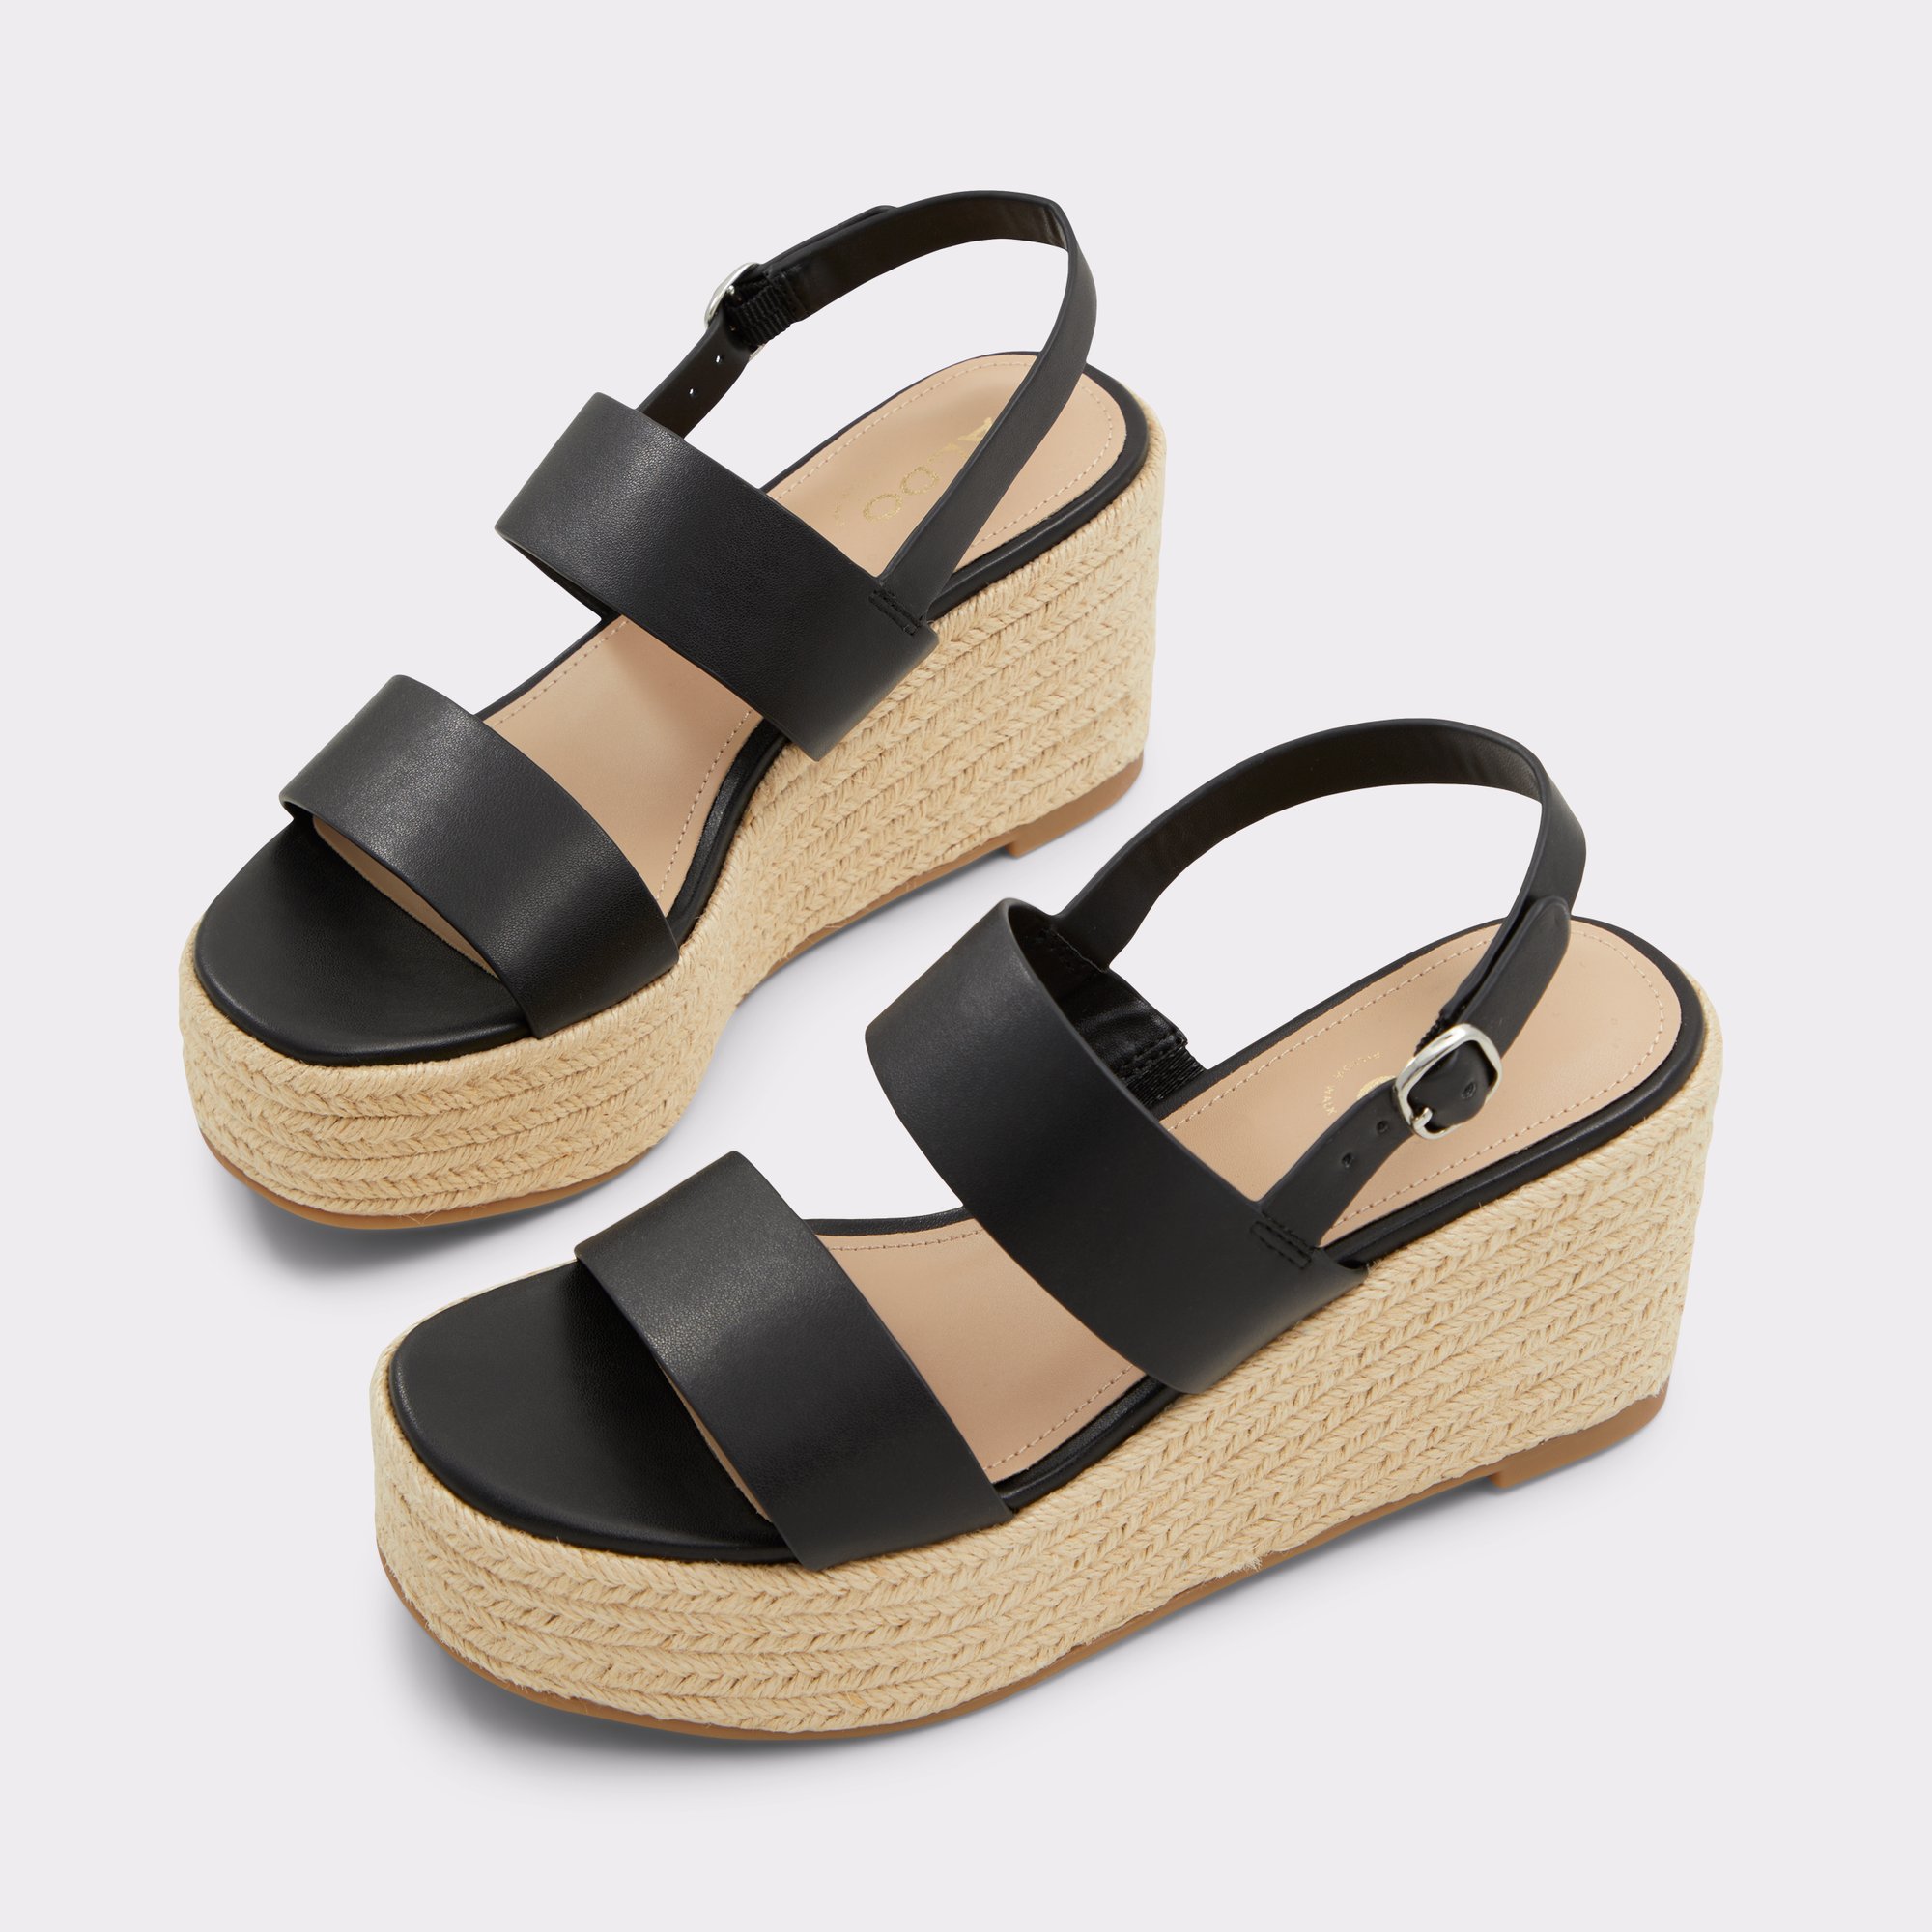 Rolly Black Wedge Sandals